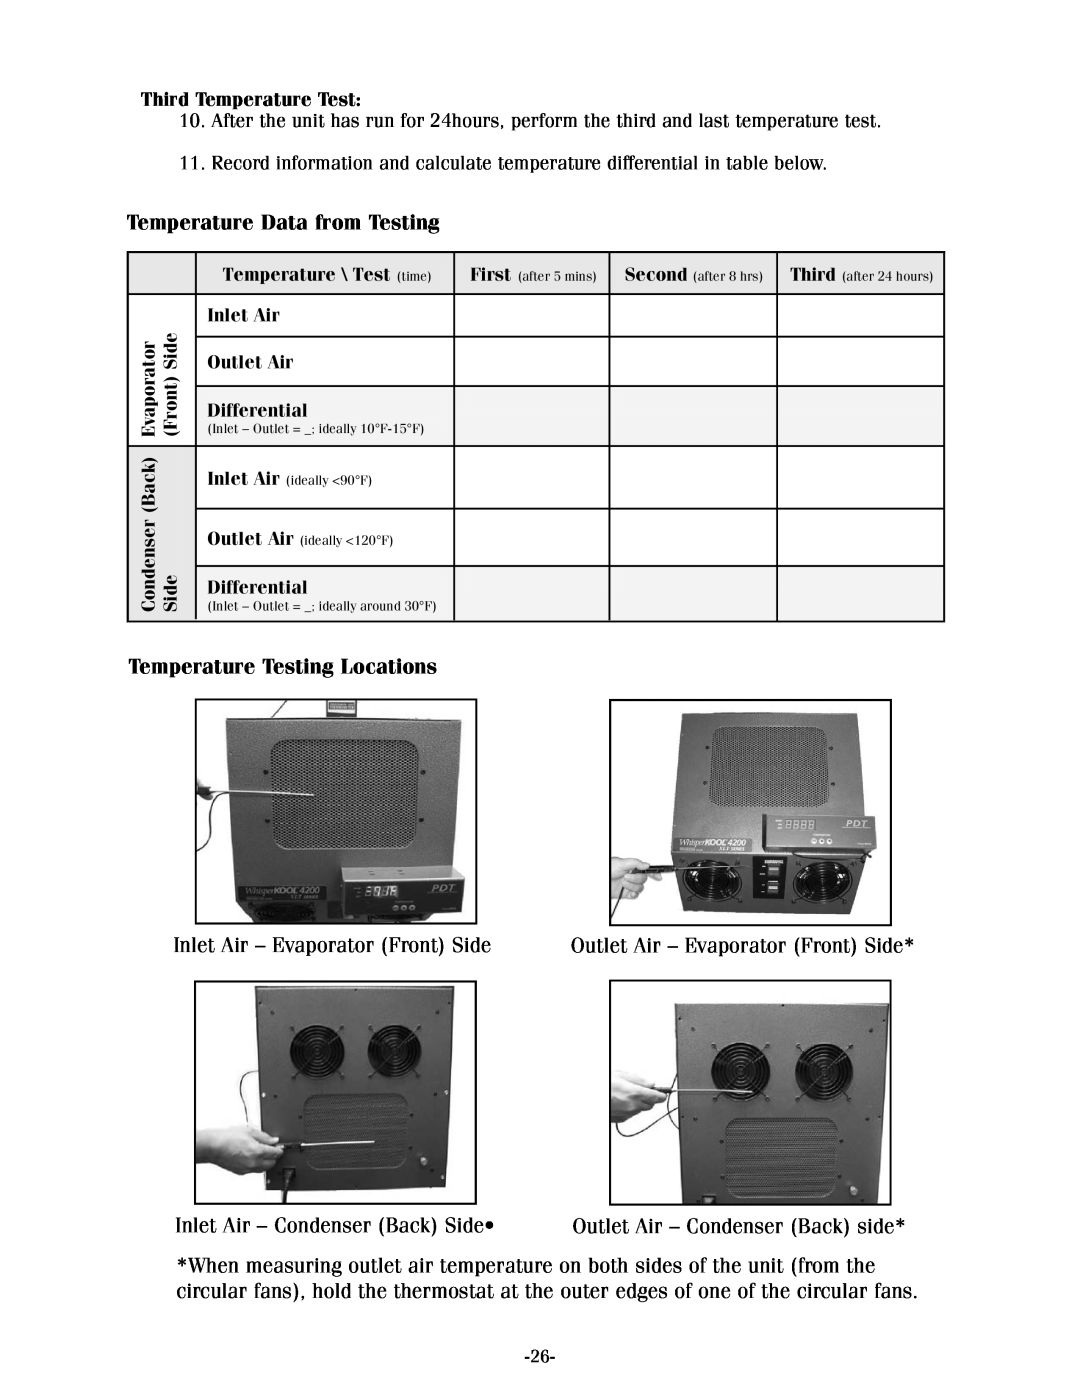 WhisperKool XLT, 17-1103 Temperature Data from Testing, Temperature Testing Locations, Inlet Air - Evaporator Front Side 